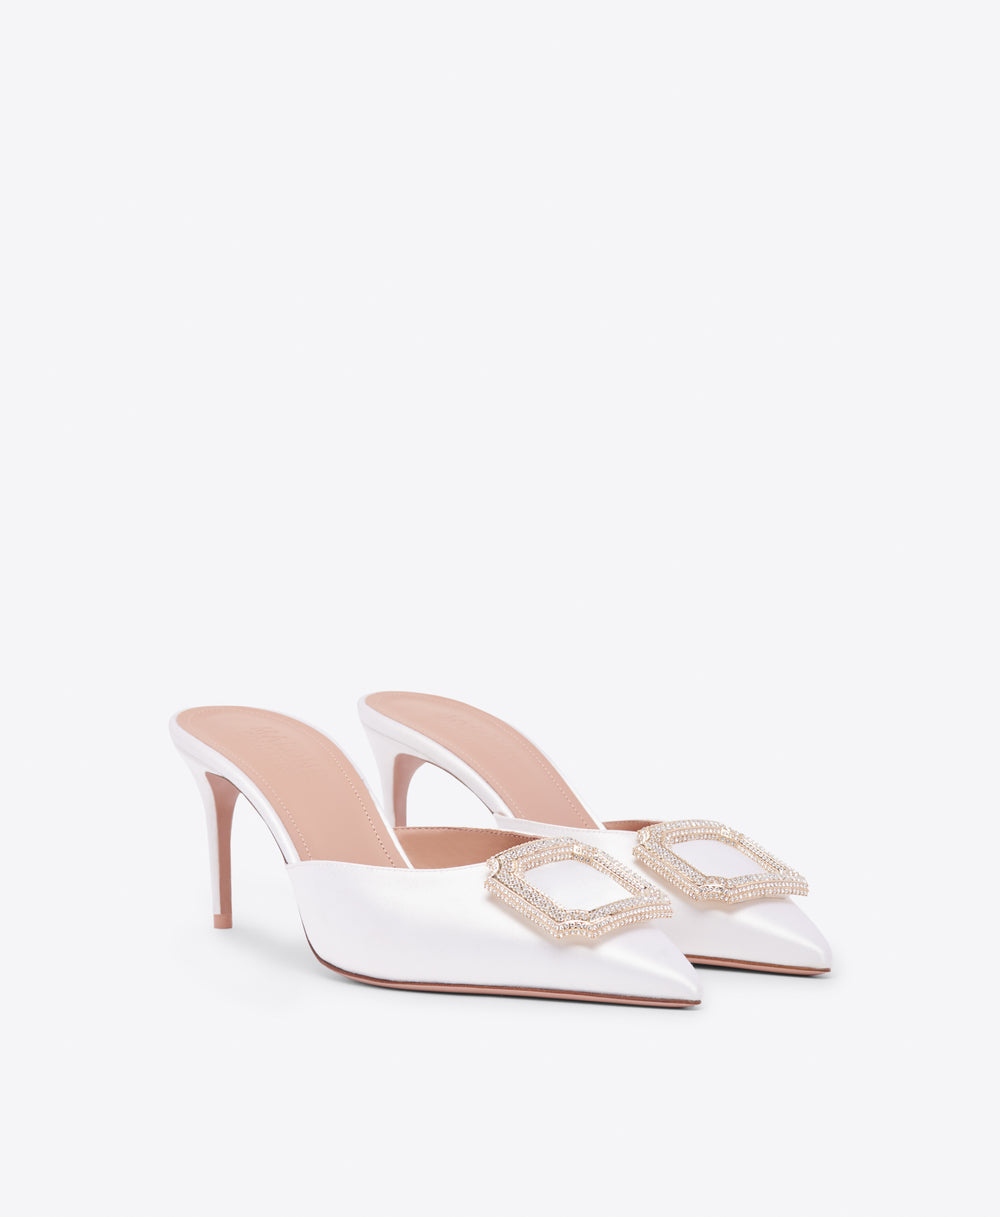 Mona 70 White Satin Mules with Crest Buckle Malone Souliers